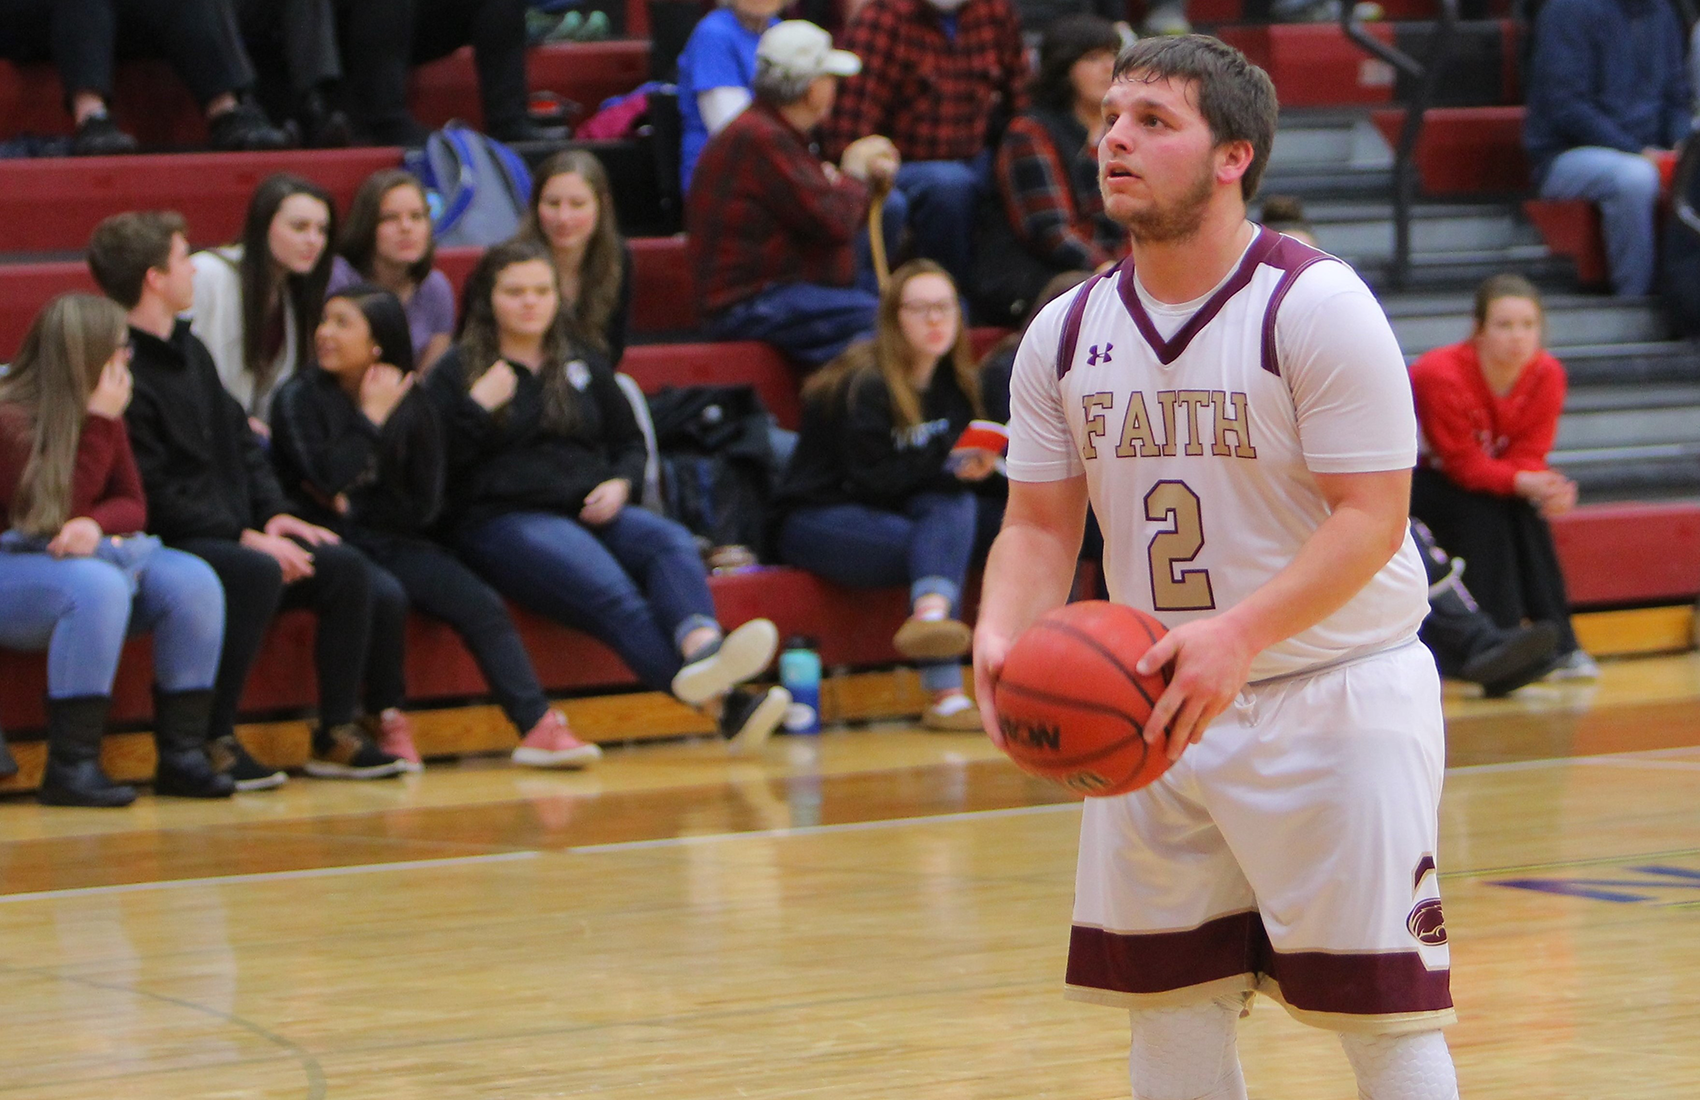 Cole Glanzer scored a season-high 13 points in the loss to Kansas Christian